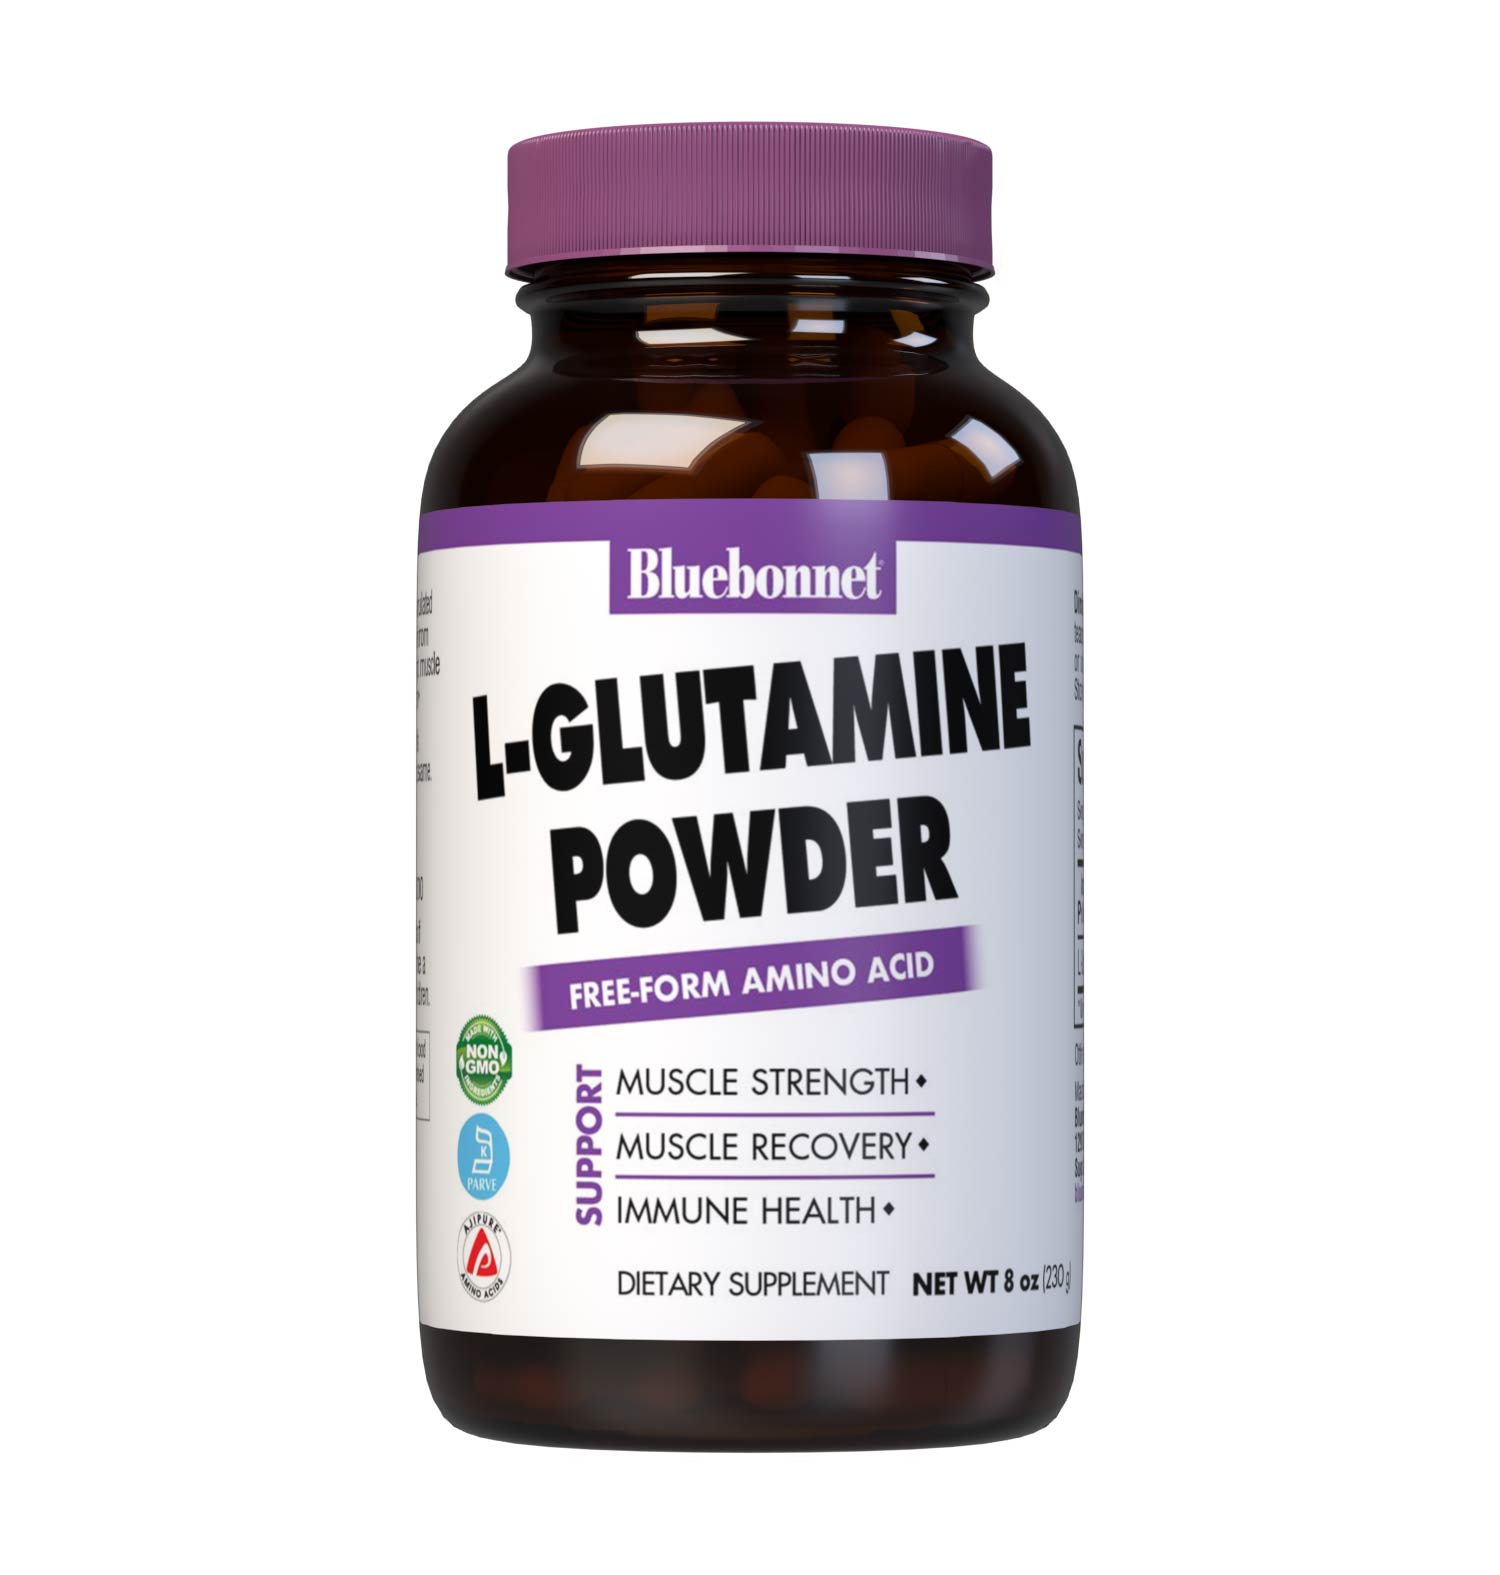 Bluebonnet’s L-Glutamine Powder is formulated with highly concentrated L-glutamine from Ajinomoto, the world-class leader in the production of amino acids. This vegetarian-sourced amino acid helps to build muscle strength, reduce muscle soreness, aid in muscle recovery and support the immune system. #size_8 oz (230 g)